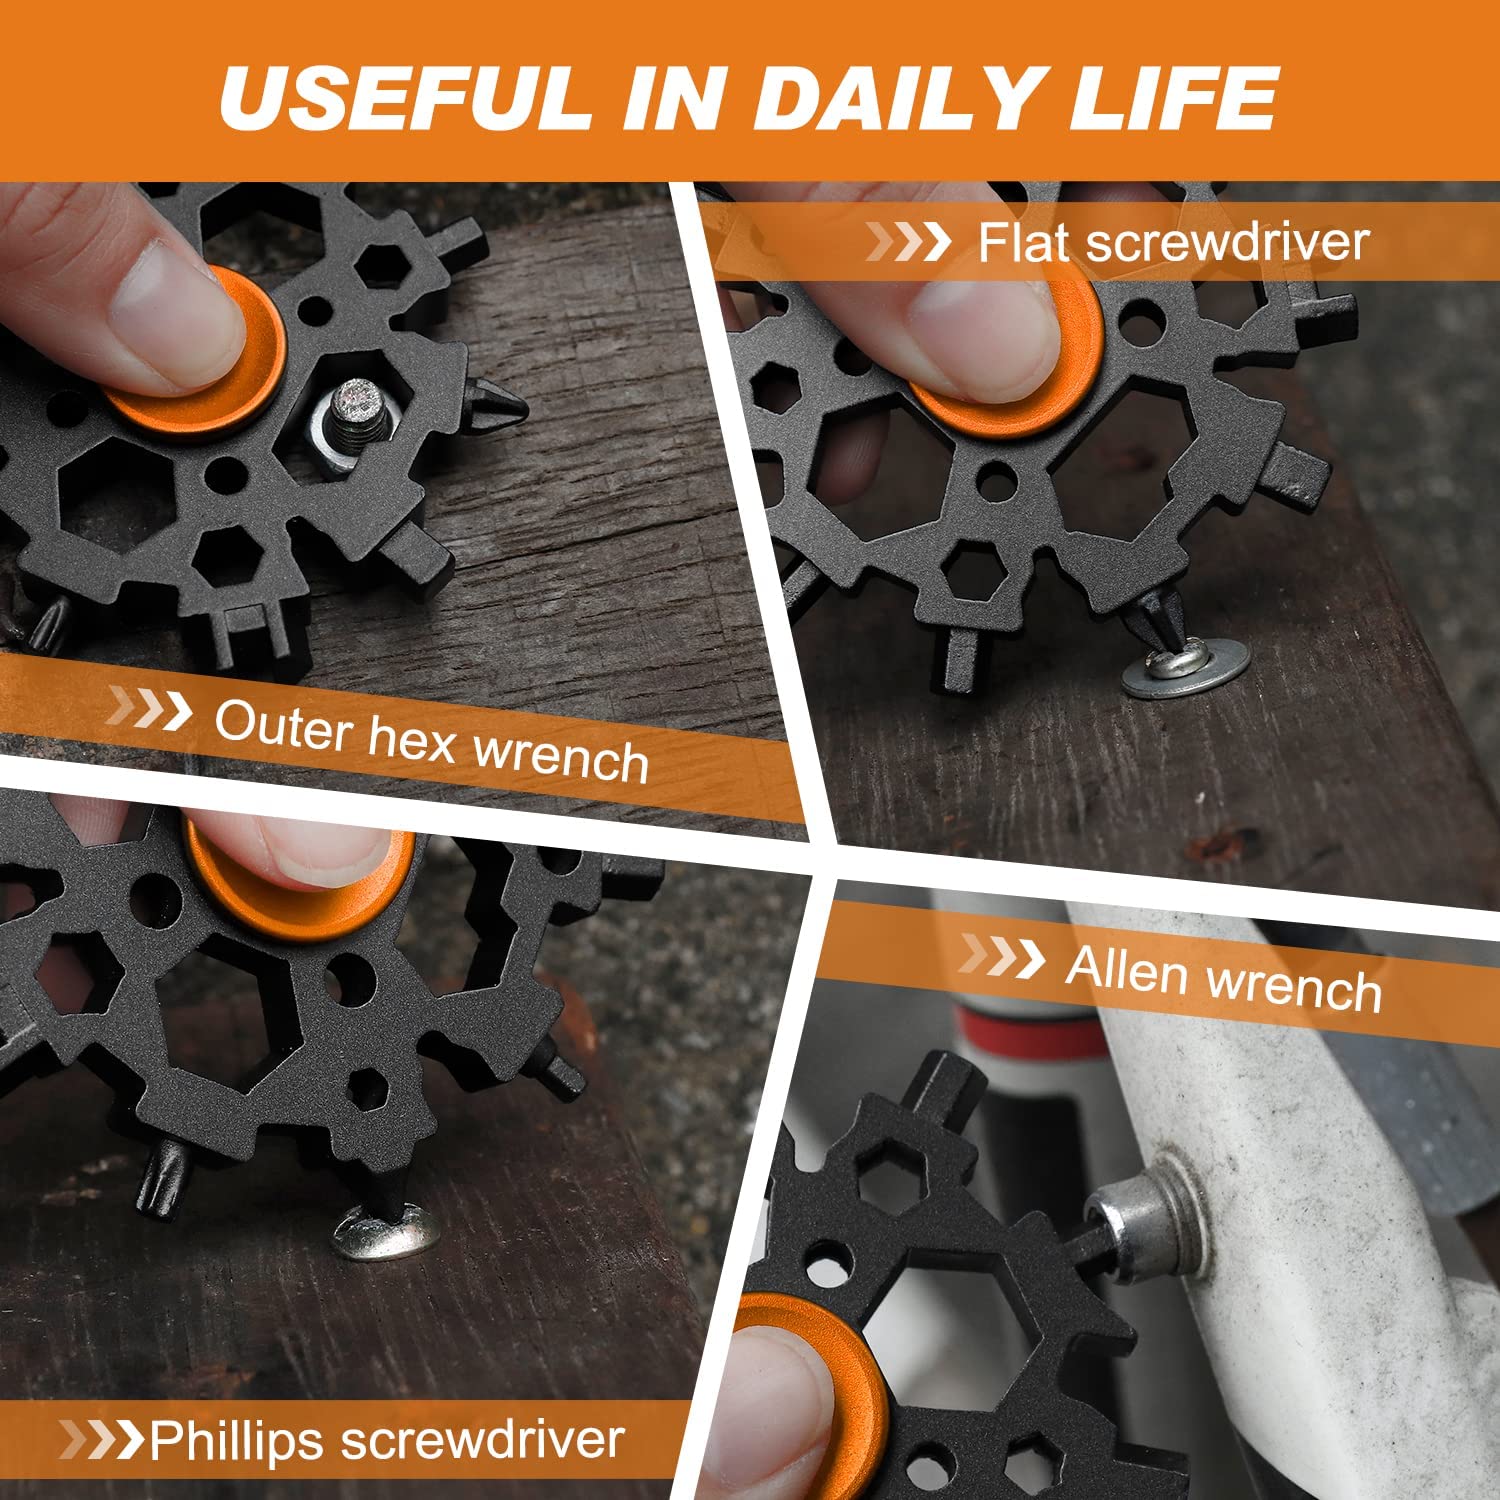 🎄Early Christmas Sale🎄 23 in 1 Snowflake Upgraded Multi Tool